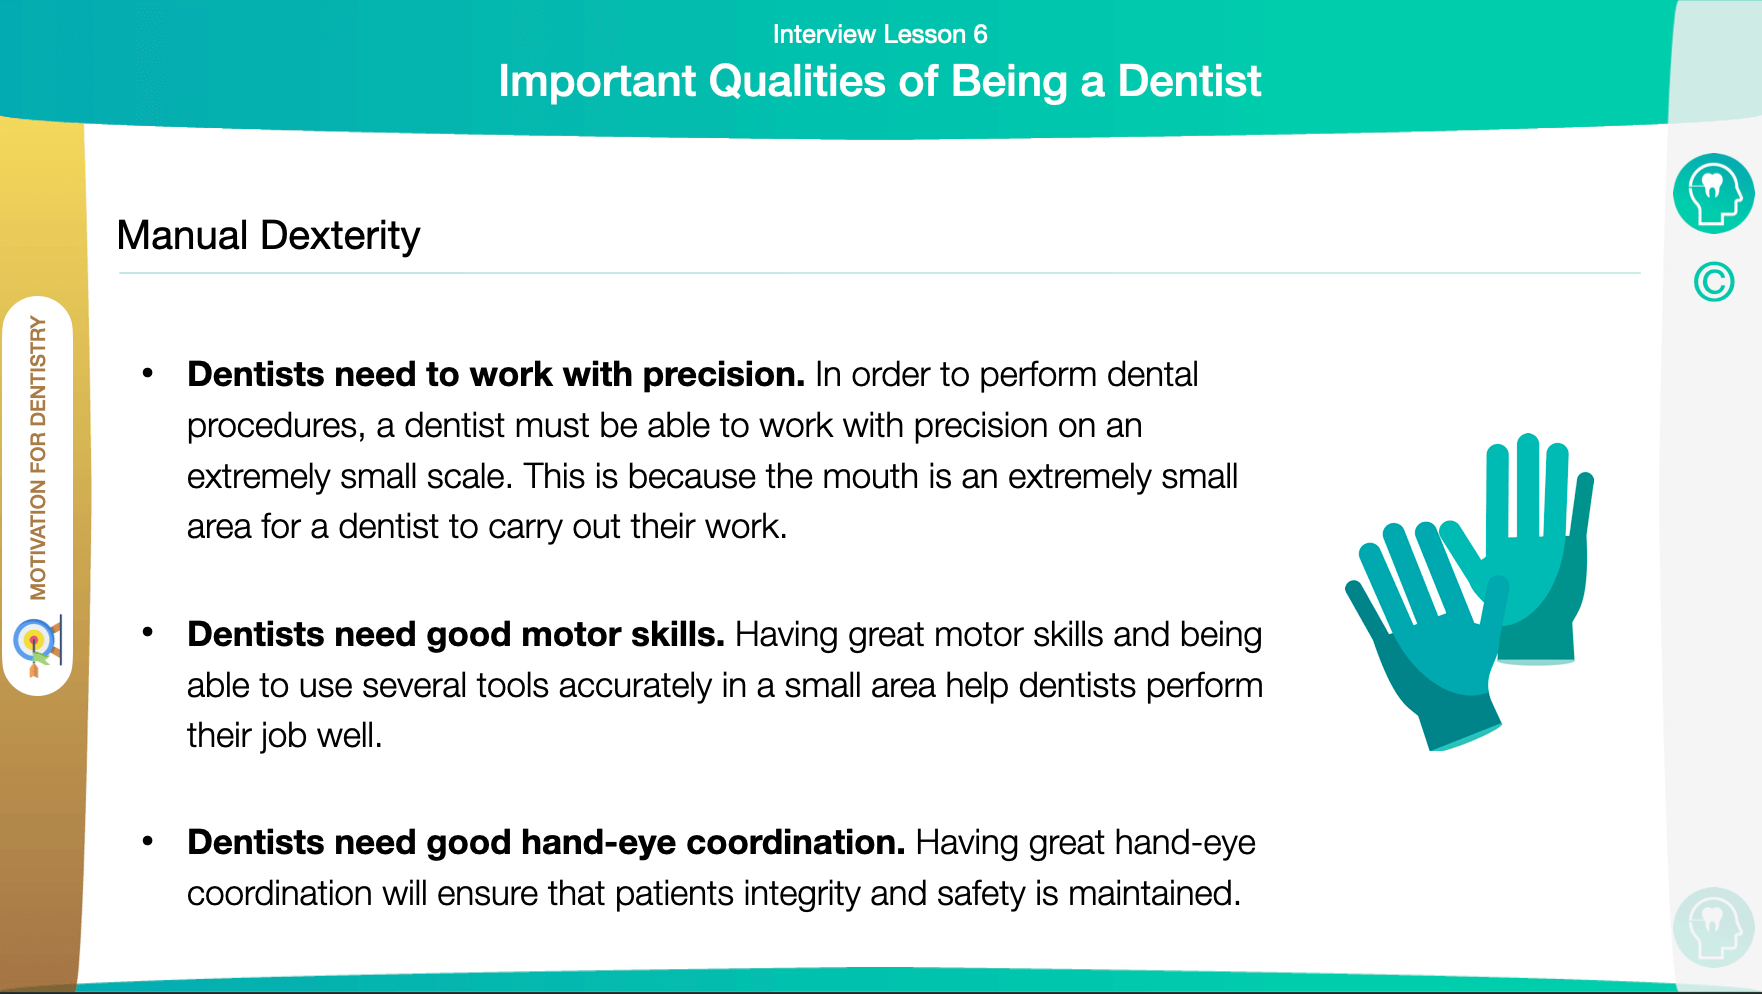 Important Qualities for Dentists